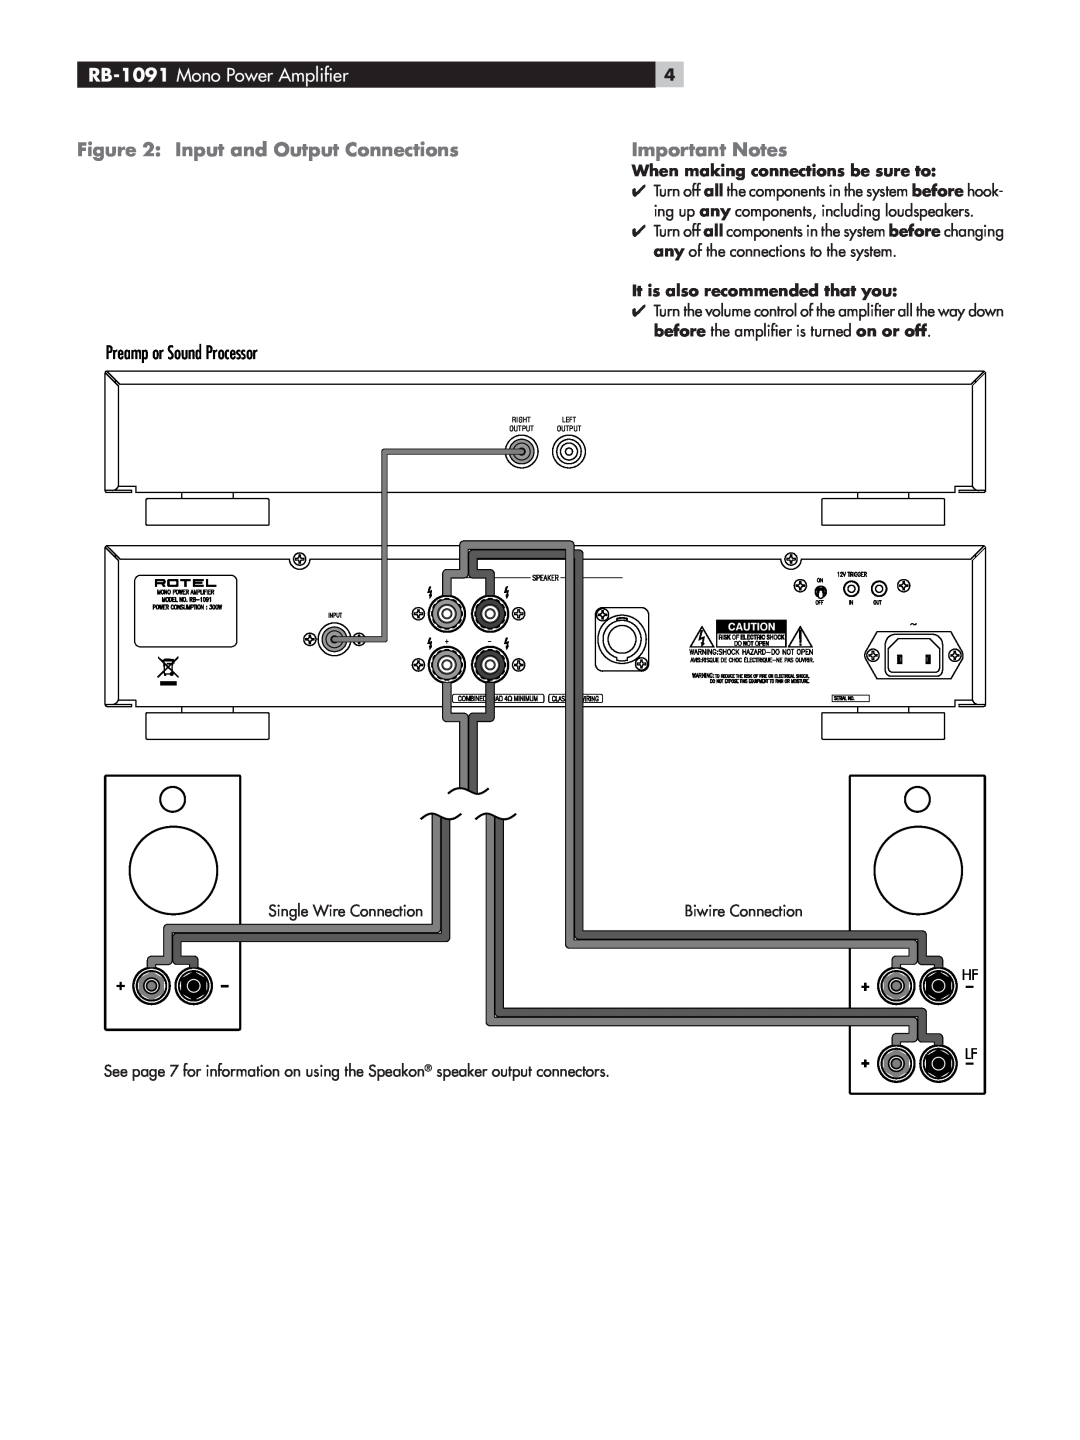 Rotel RB-1091 Mono Power Ampliﬁer, Input and Output Connections, Important Notes, Anschlussdiagramm, In- och utgångar 